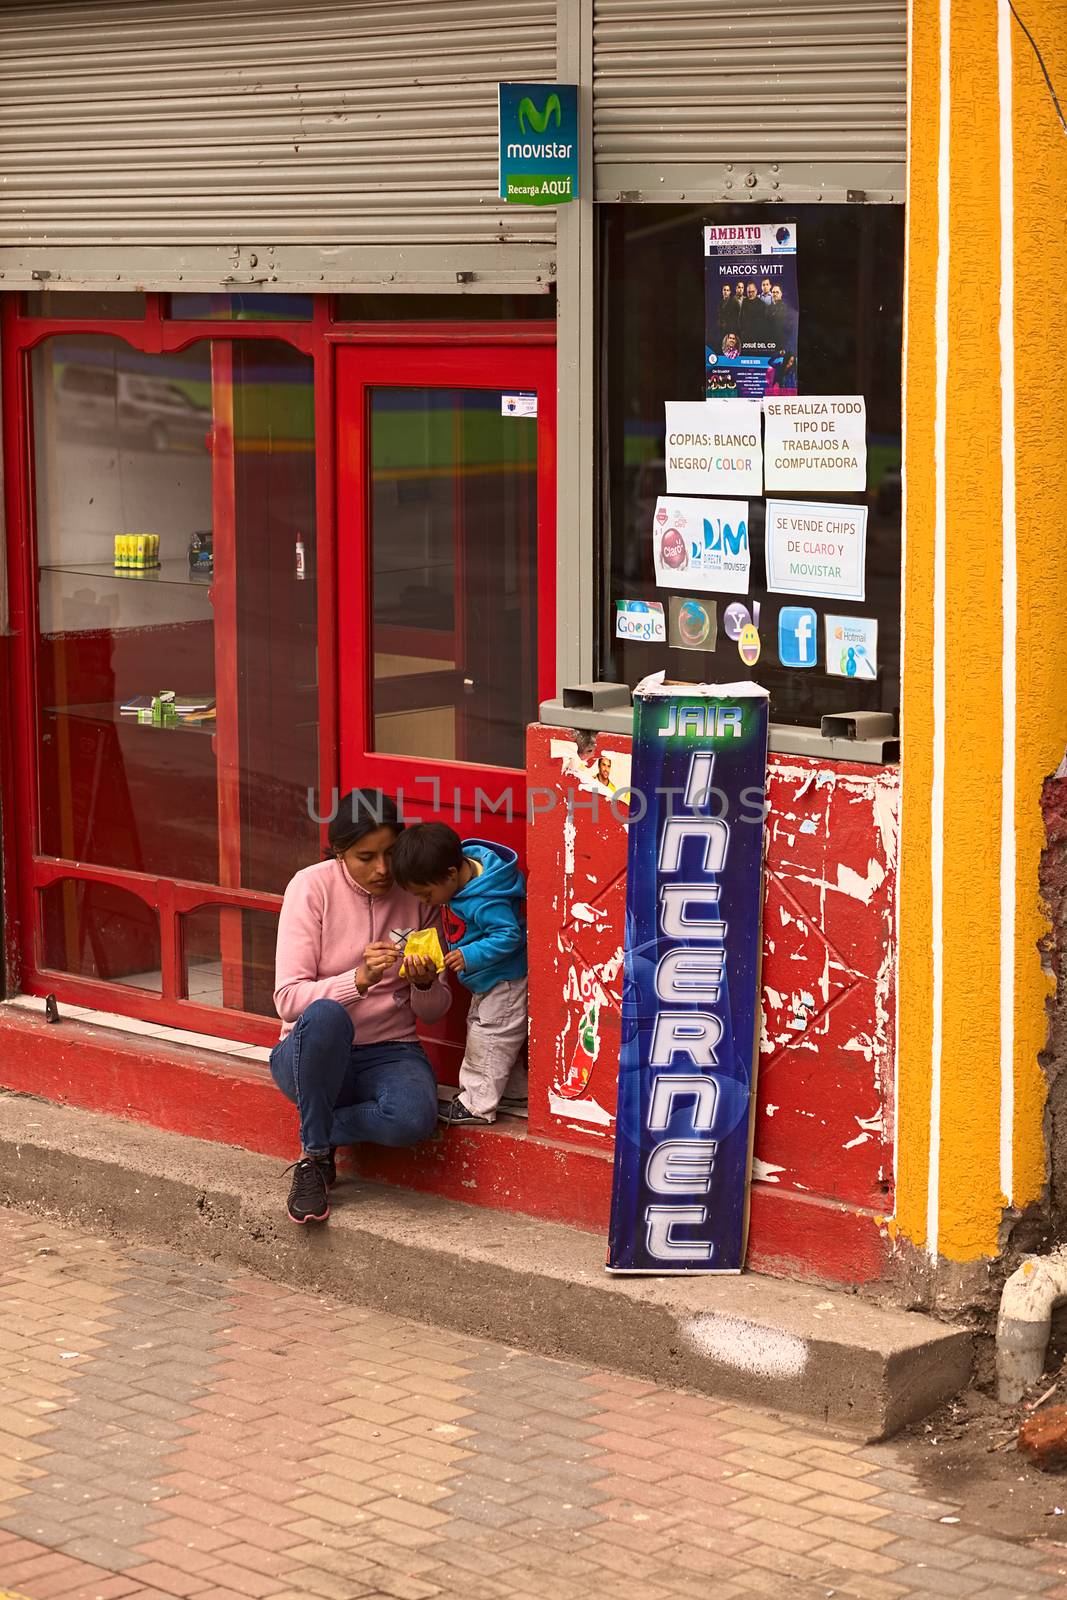 TUNGURAHUA, ECUADOR - MAY 12, 2014: Unidentified woman with child sitting on the stairs at the entrance of an internet cafe and eating a snack in a small town on the road between Ambato and Banos on May 12, 2014 in Tungurahua Province, Ecuador